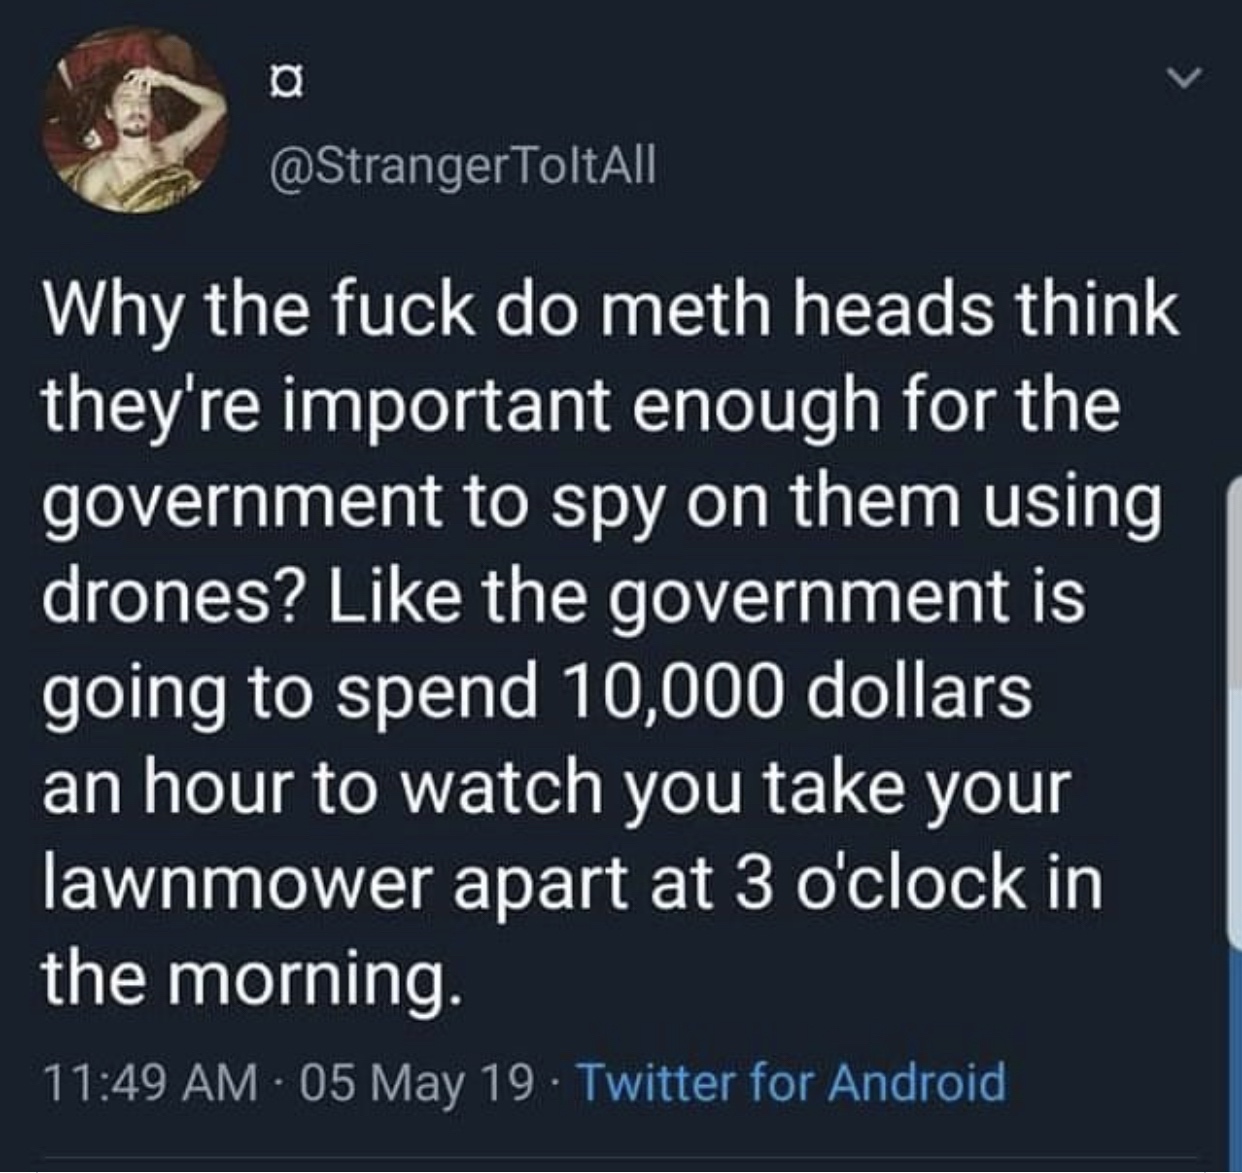 lyrics - ToltAll Why the fuck do meth heads think they're important enough for the government to spy on them using drones? the government is going to spend 10,000 dollars an hour to watch you take your lawnmower apart at 3 o'clock in the morning. 05 May 1